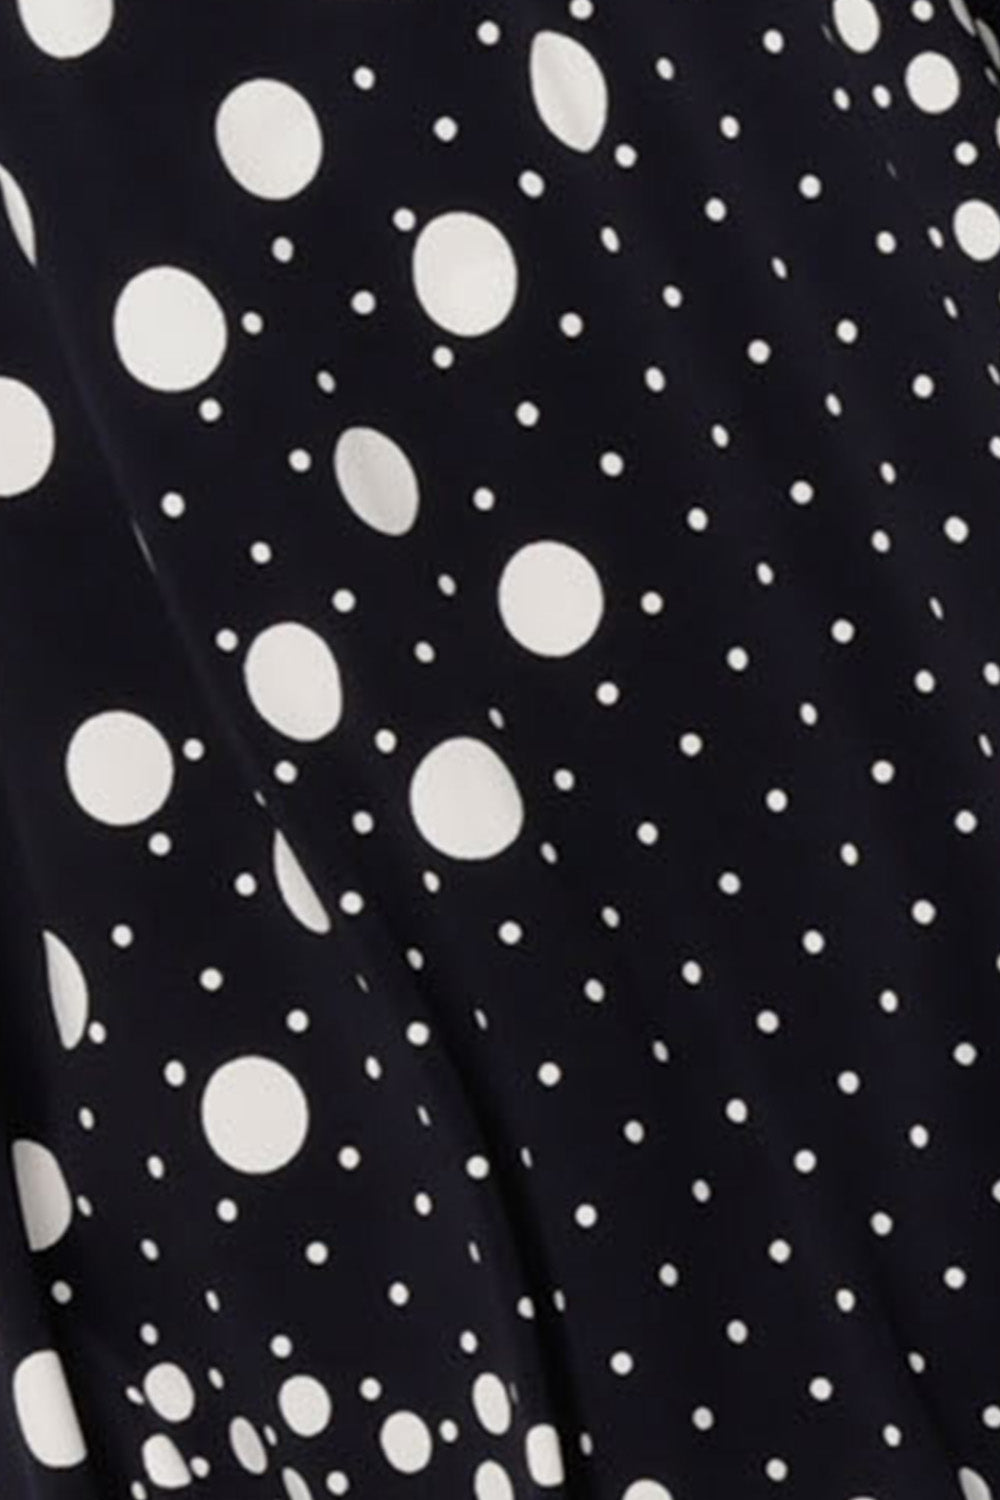 Fabric swatch of Australia and New Zealand women's clothing label, L&F's navy and white polka dot 'Foxtrot' print used on a range of wrap dresses and workwear tops.